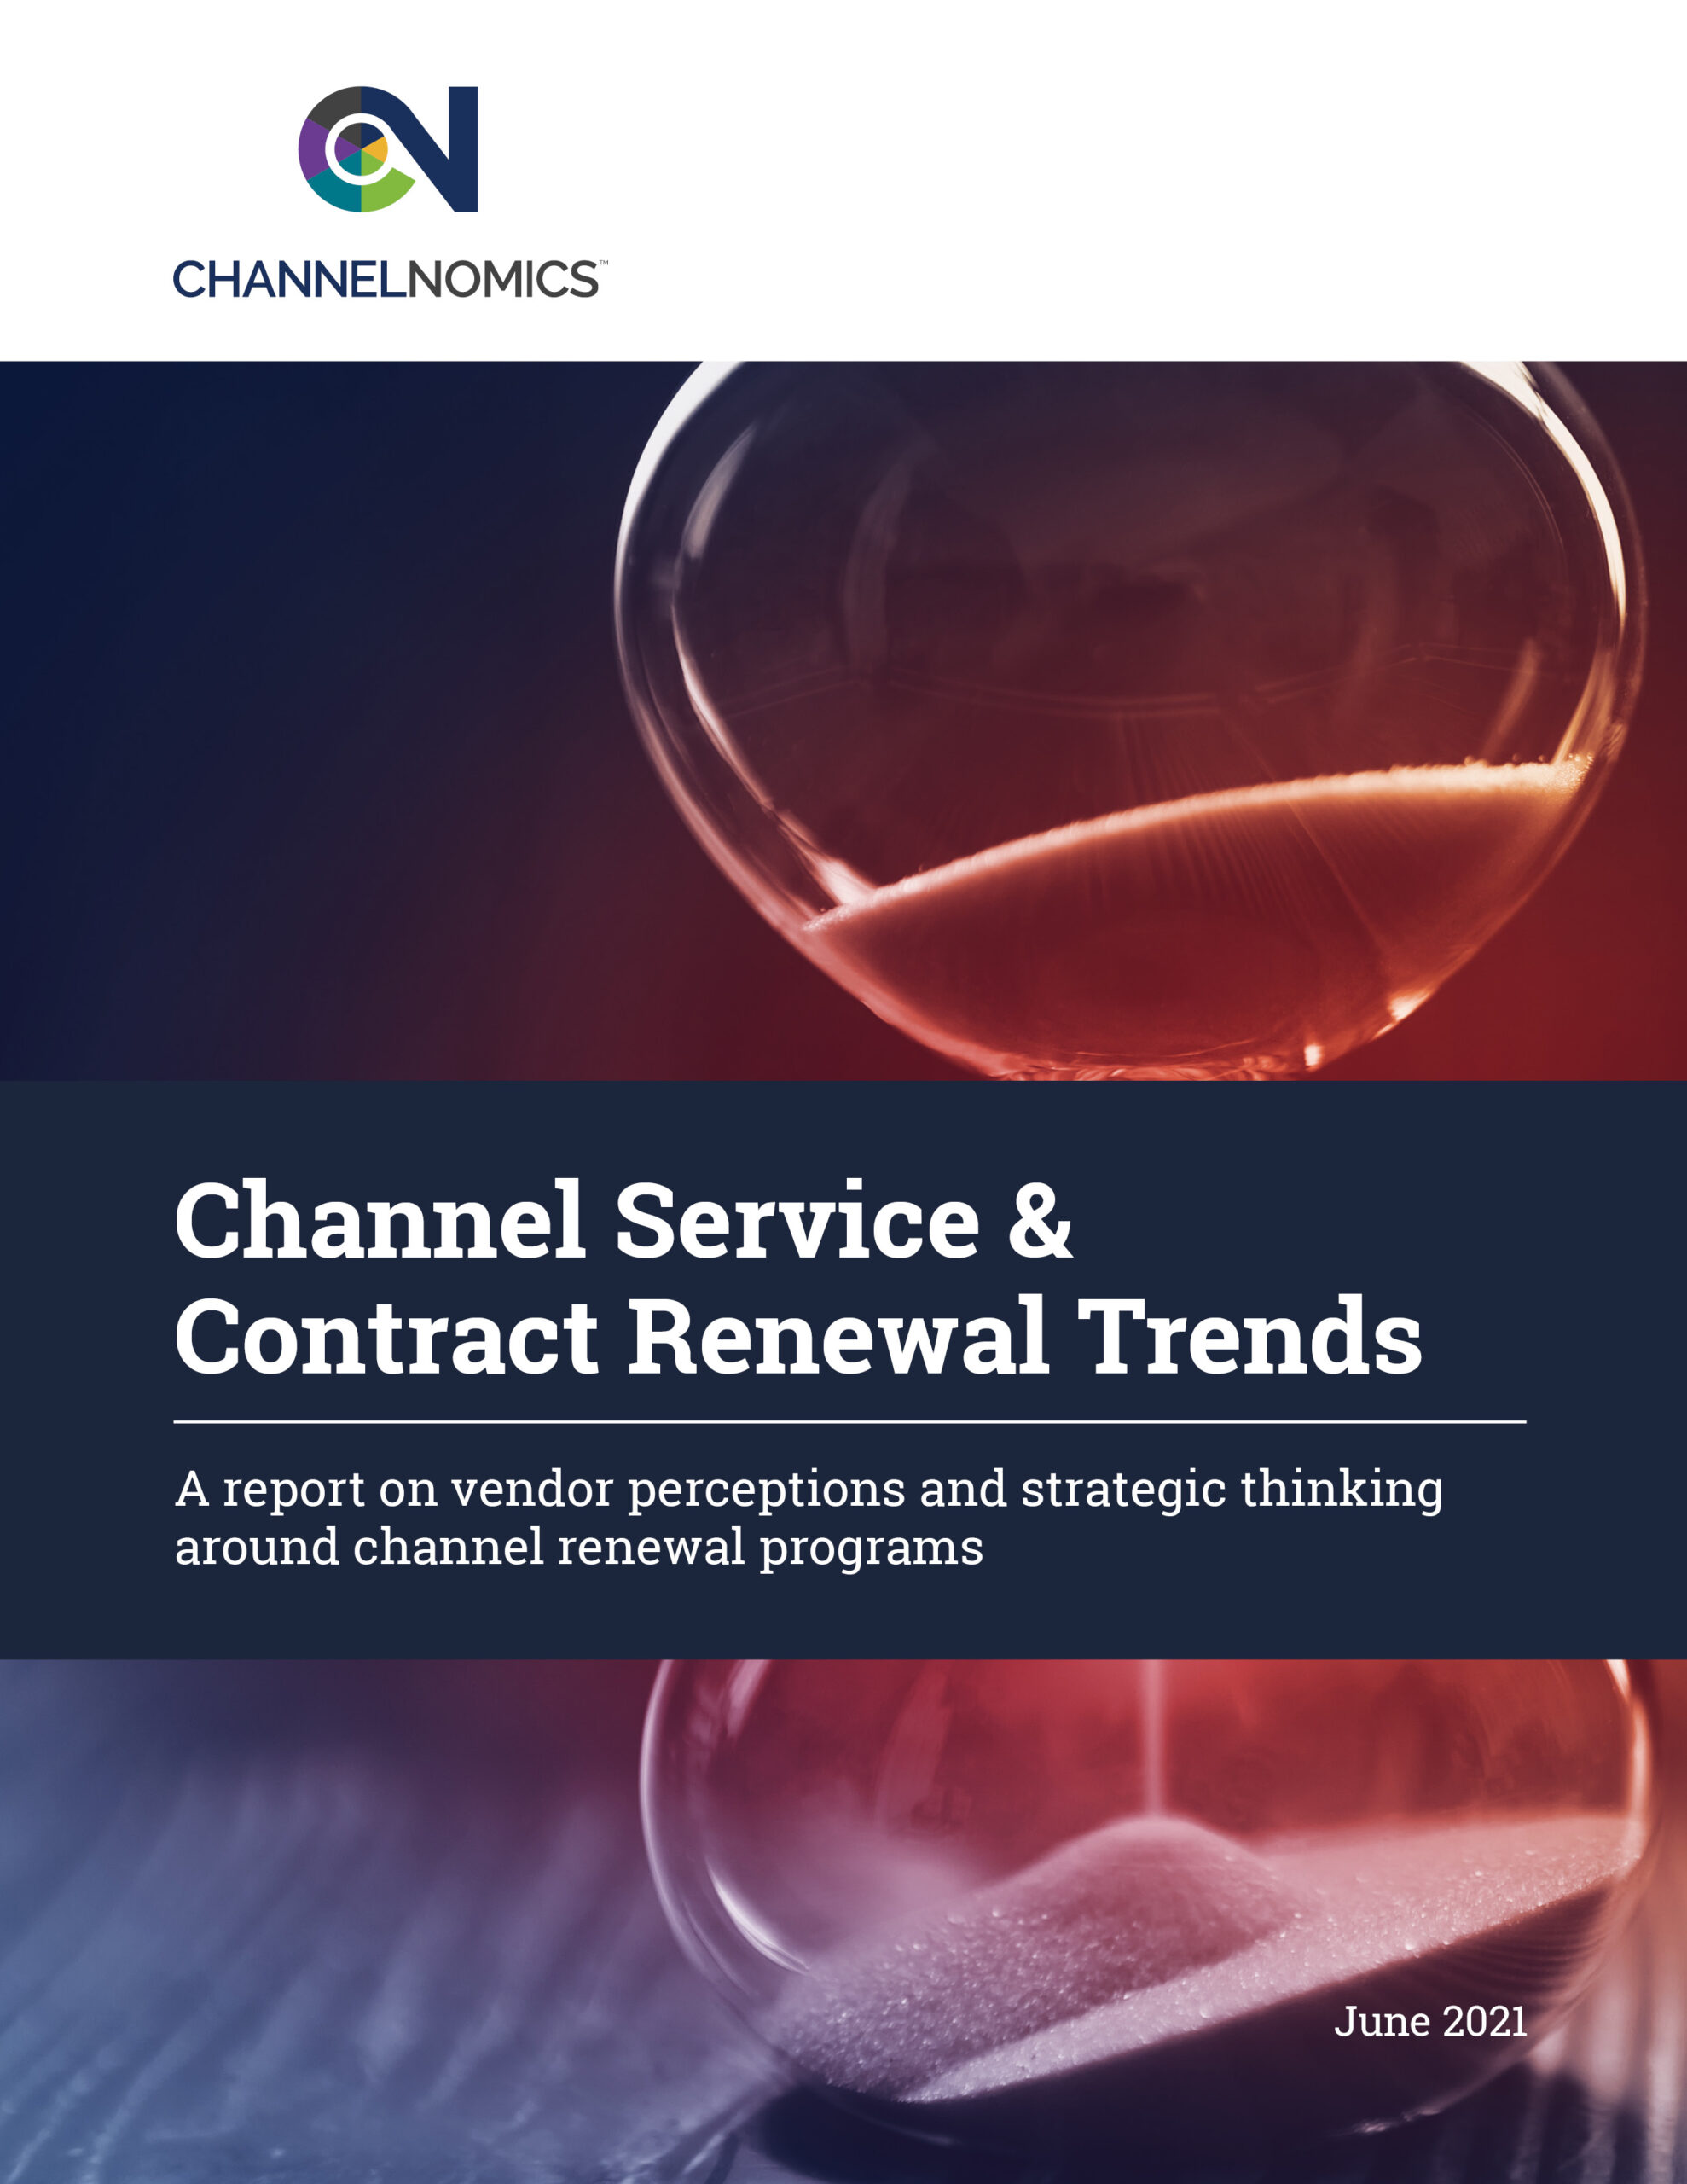 Channel Service & Contract Renewal Trends 2021